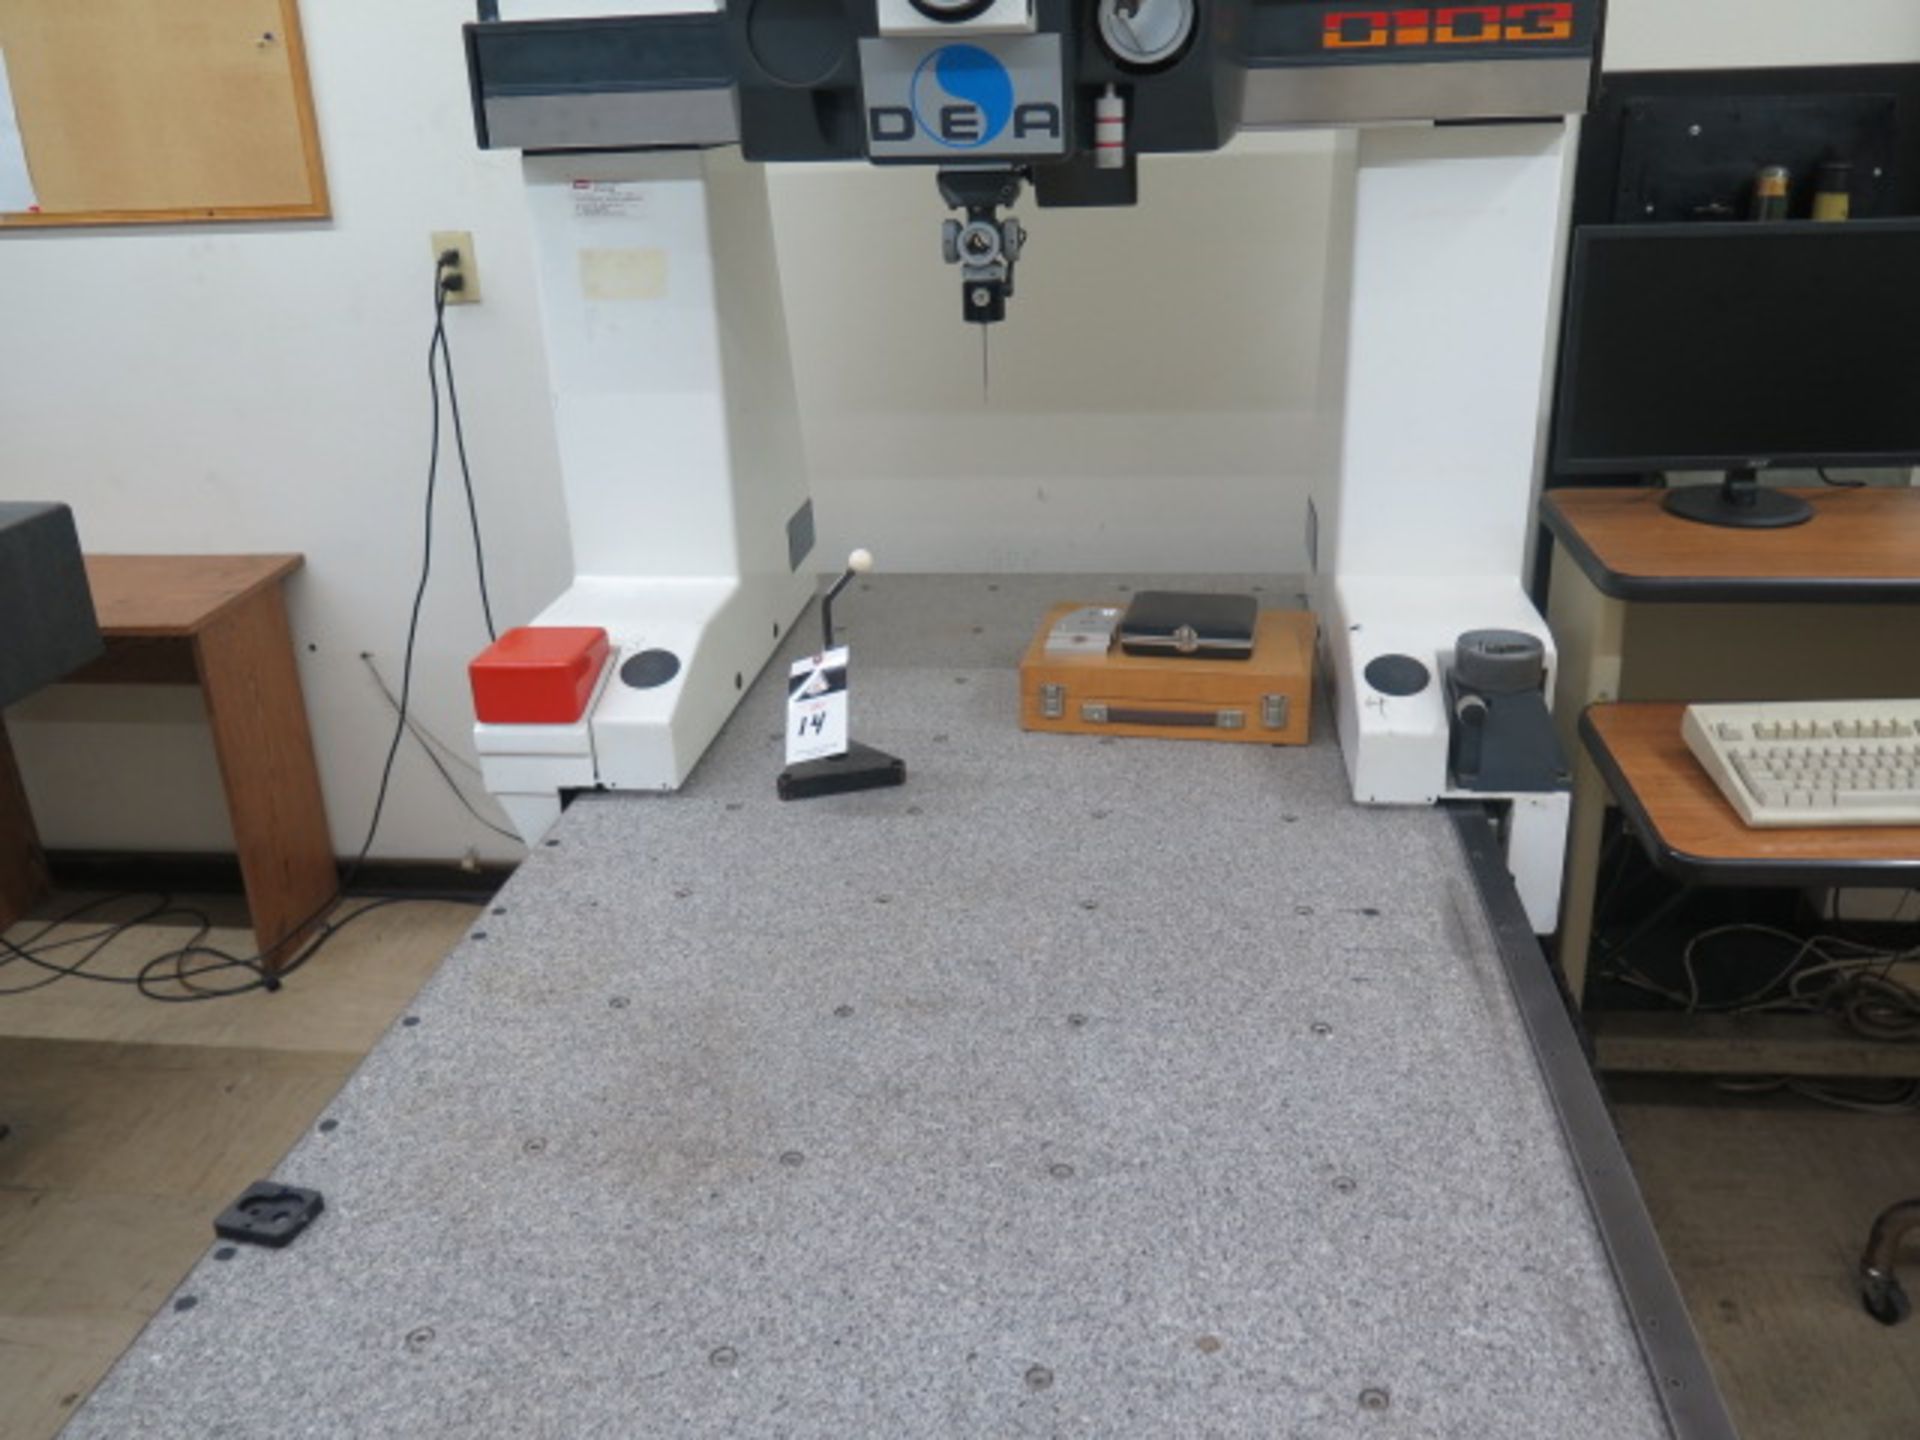 DEA mdl. 0103 CMM s/n 00537 w/ Renishaw TP 1S Probe Head, 50” x 26” x 18” Work Envelope, SOLD AS IS - Image 4 of 18